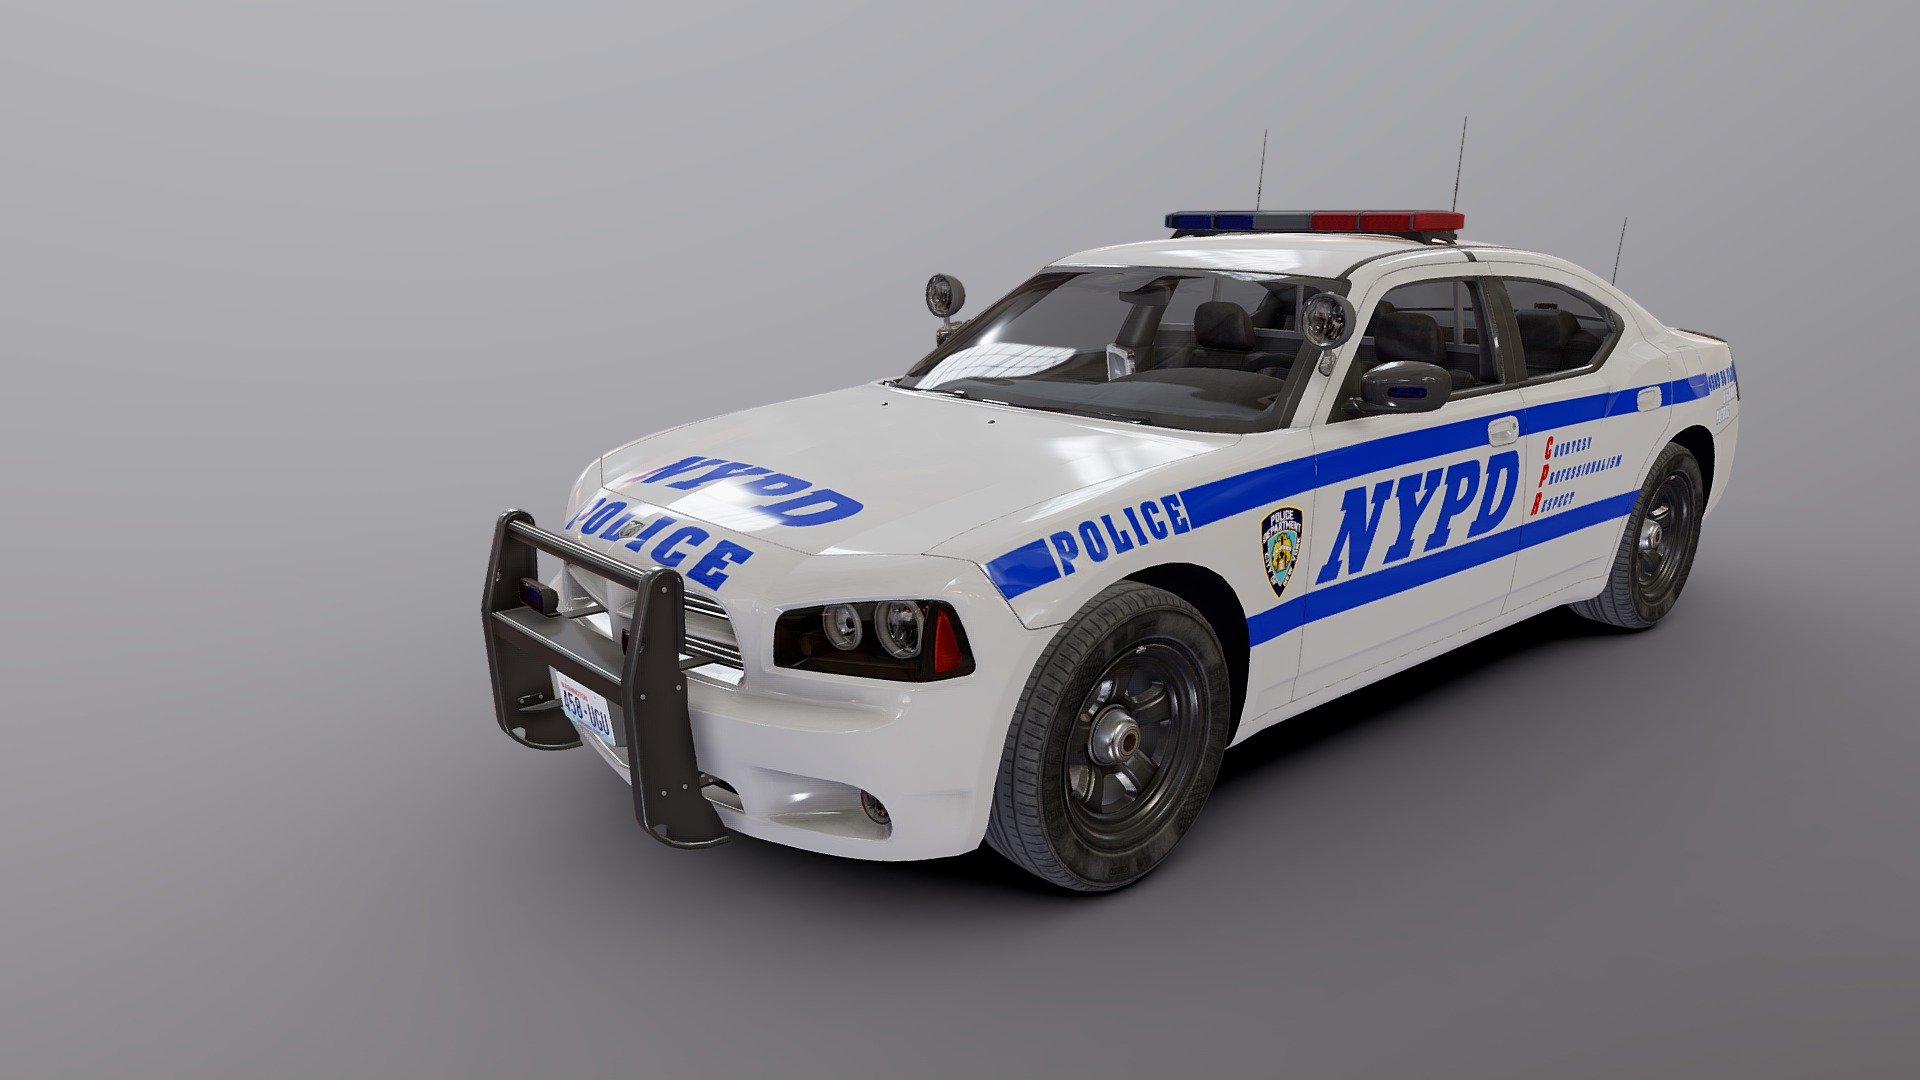 Dodge Charger NewYork police car model.

Midpoly exterior.

Lowpoly interior(1024x1024 diffuse texture).

Low poly wheels with PBR textures(2048x2048).

Full model - 57136 tris 33718 verts

Lowpoly interior - 4402 tris 2510 verts

Wheels - 7956 tris 4488 verts

Model ready for real-time apps, games, virtual reality and augmented reality.

Asset looks accuracy and realistic and become a good part of your project 3d model